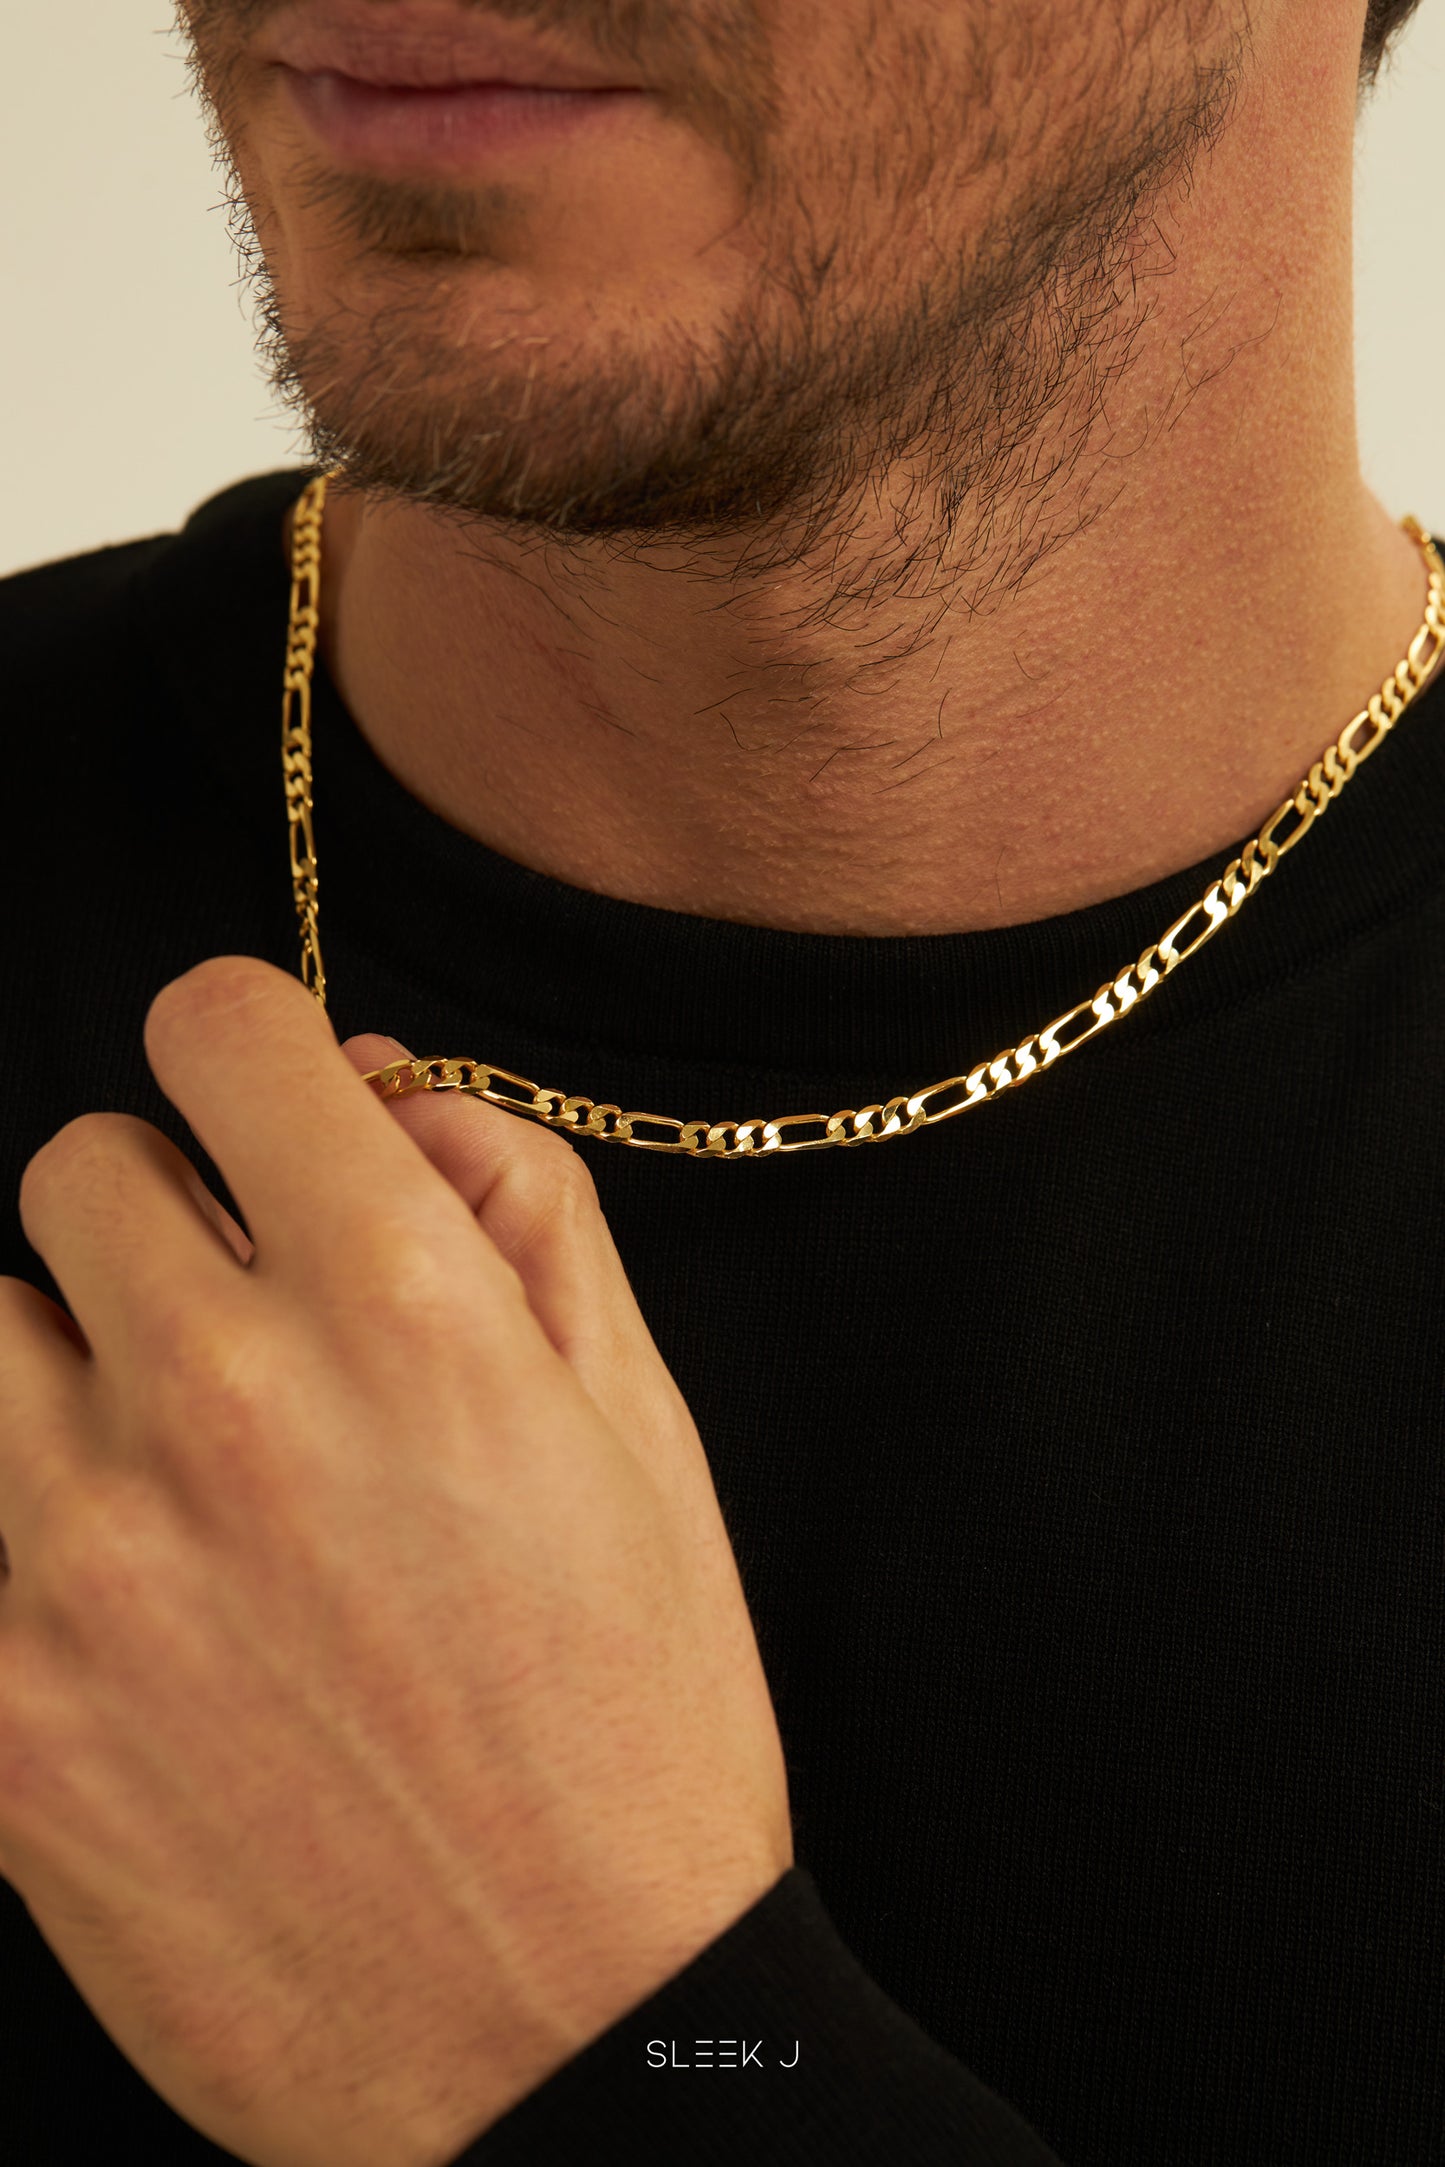 High-Quality Gold-Plated 925 Sterling Silver Figaro Chain